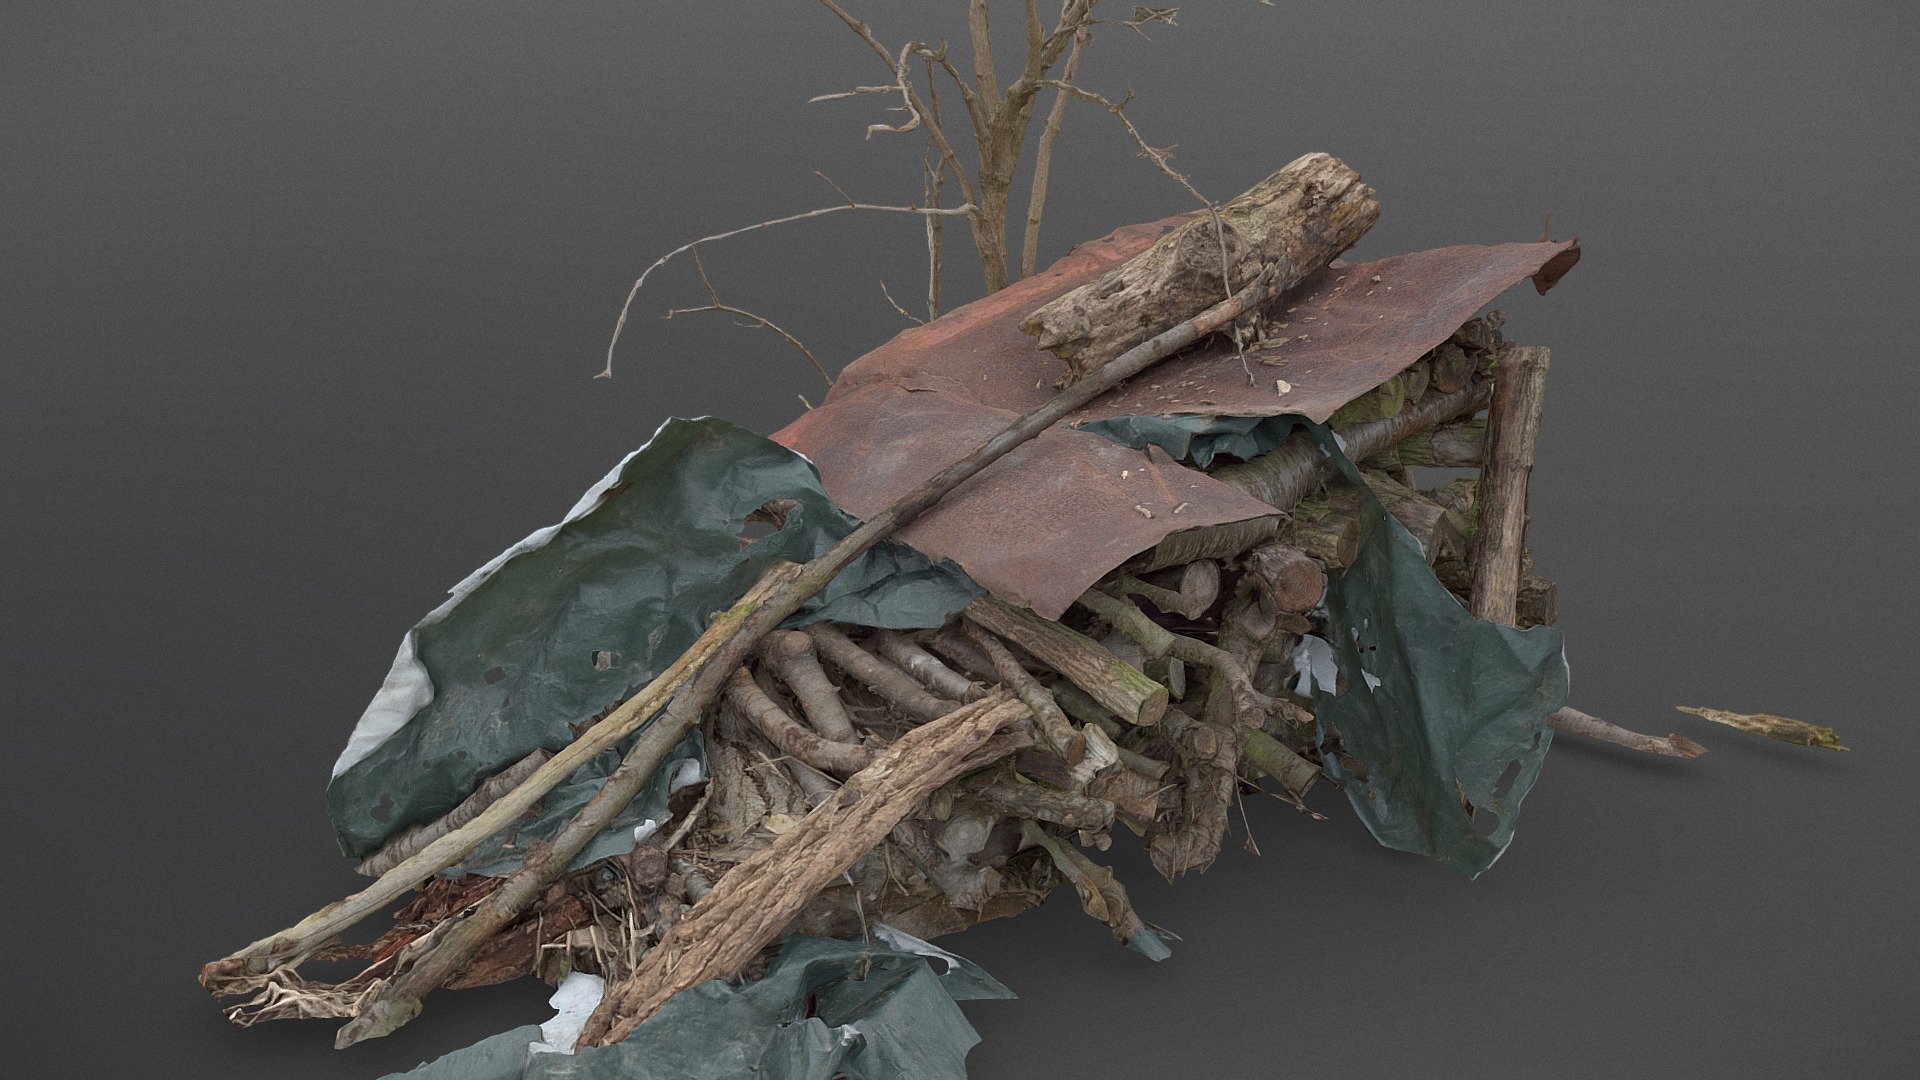 Old cut timber firewood lumber stack trees spruce logs branches stacked stack pile heap in forest, trunks logging stacked pile, wood lumber industry countryside terrain shack surrounding environment

photogrammetry scan (36MP x 250photos), 4x8K texture + HD normals - Old small lumber stack - Buy Royalty Free 3D model by matousekfoto 3d model